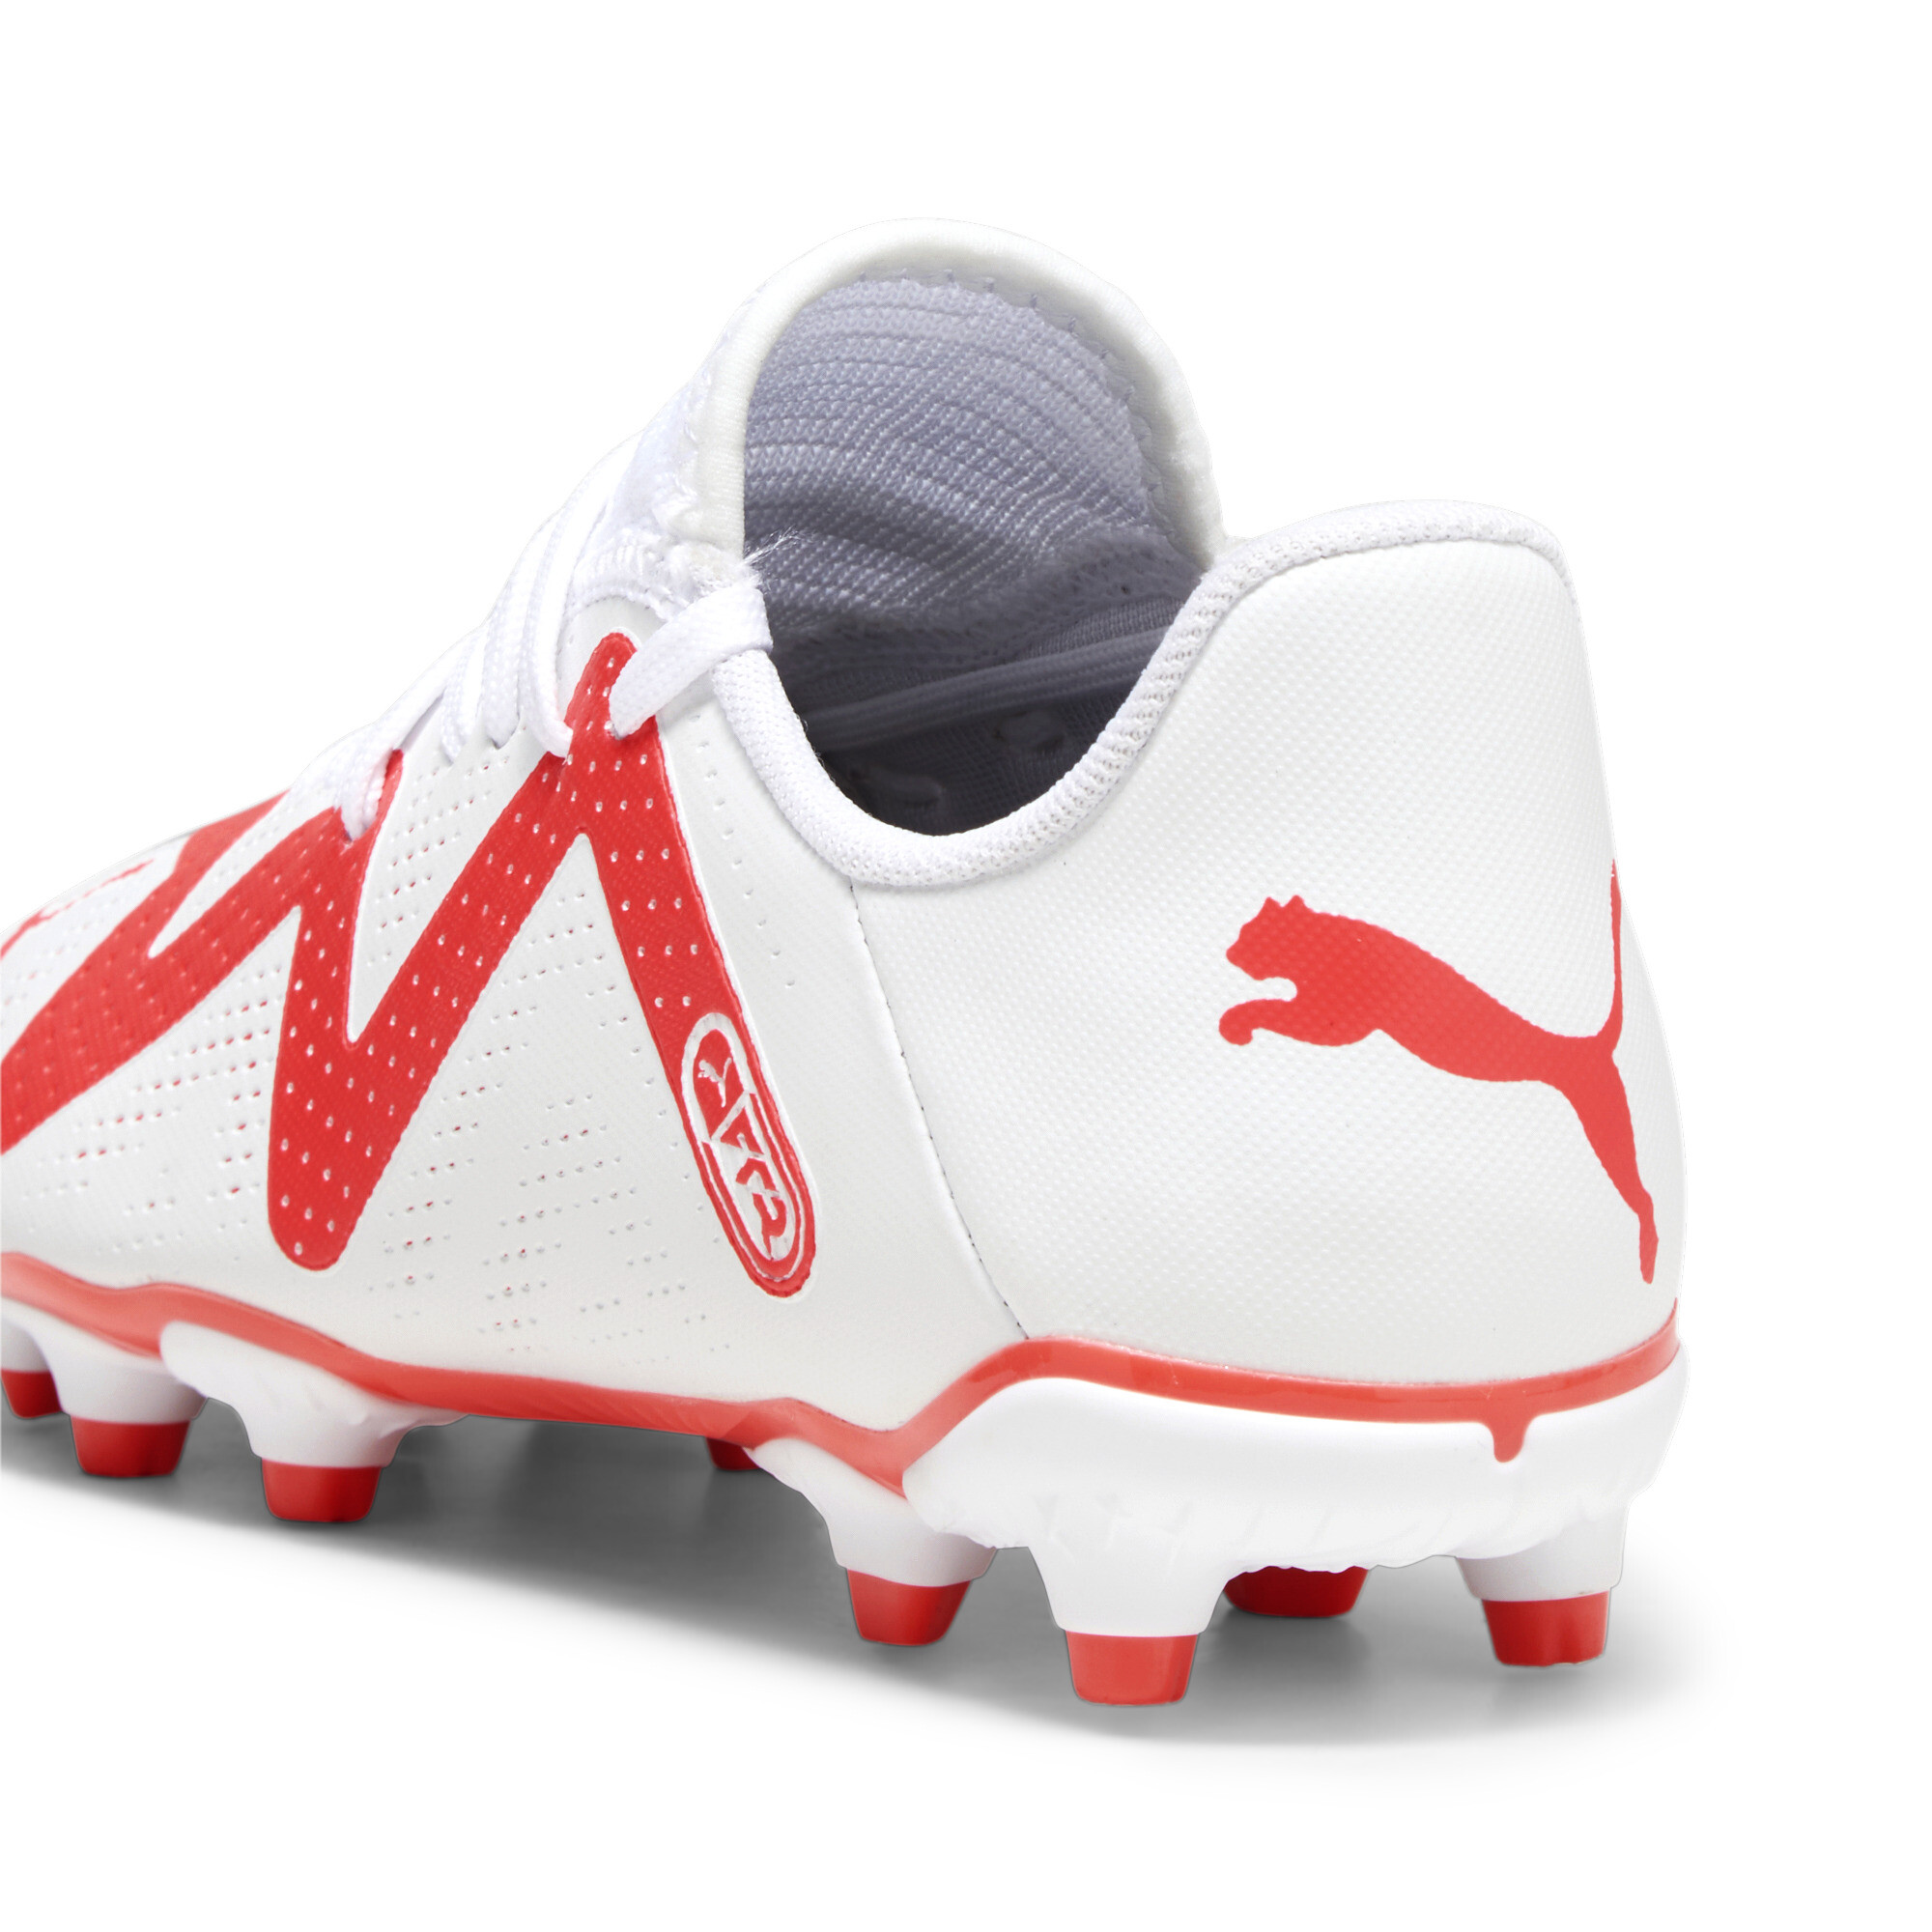 Puma FUTURE PLAY FG/AG Youth Football Boots, White, Size 34.5, Shoes